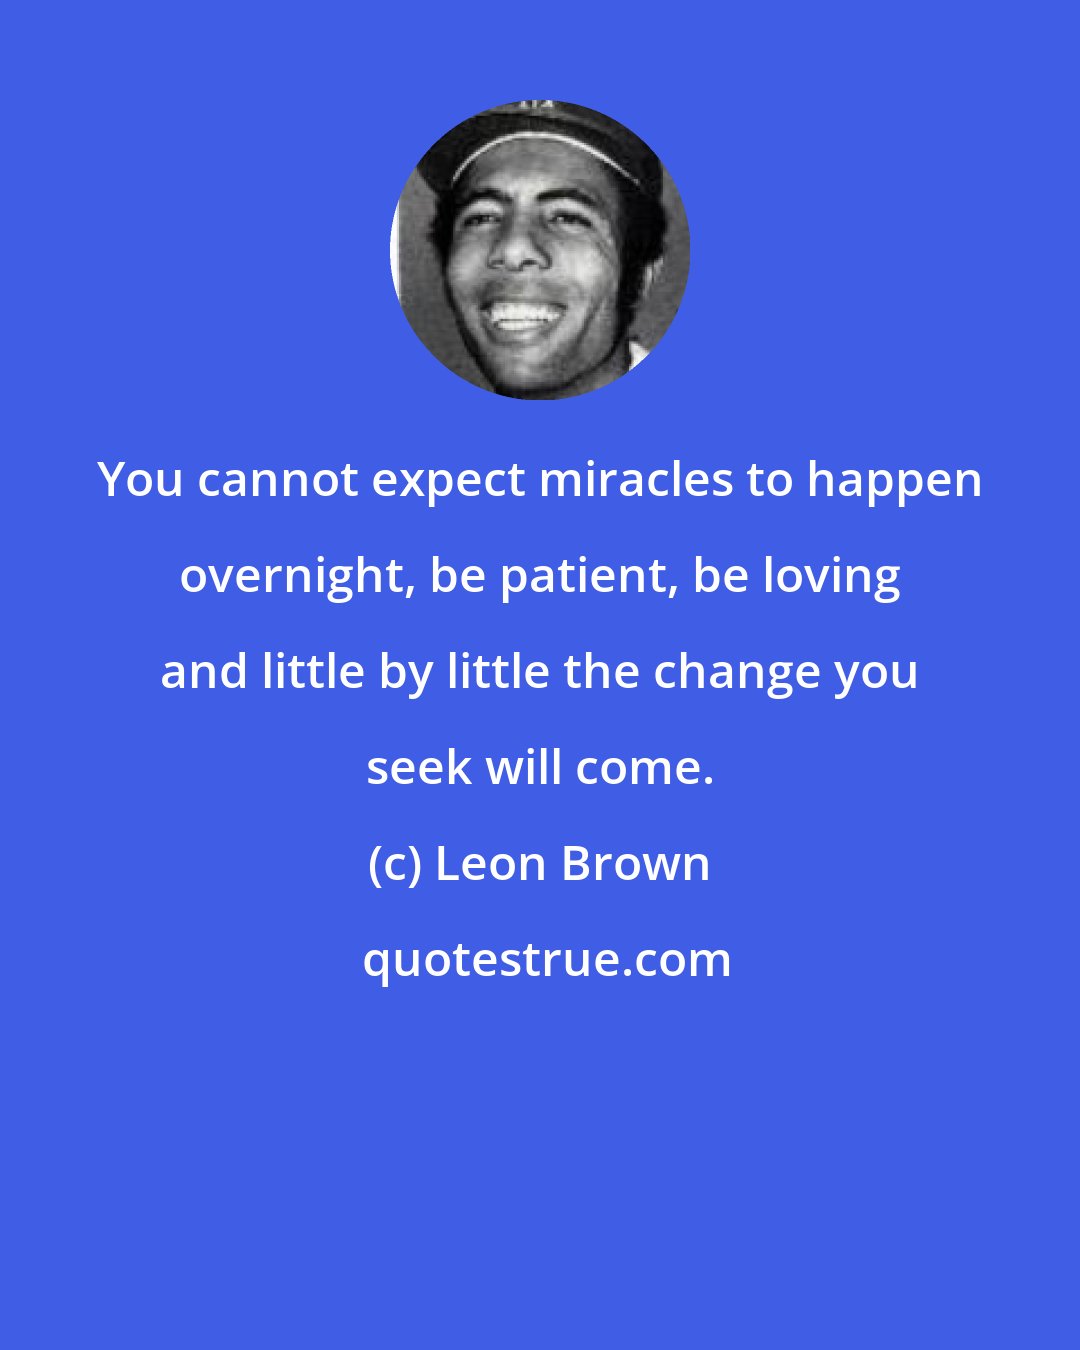 Leon Brown: You cannot expect miracles to happen overnight, be patient, be loving and little by little the change you seek will come.